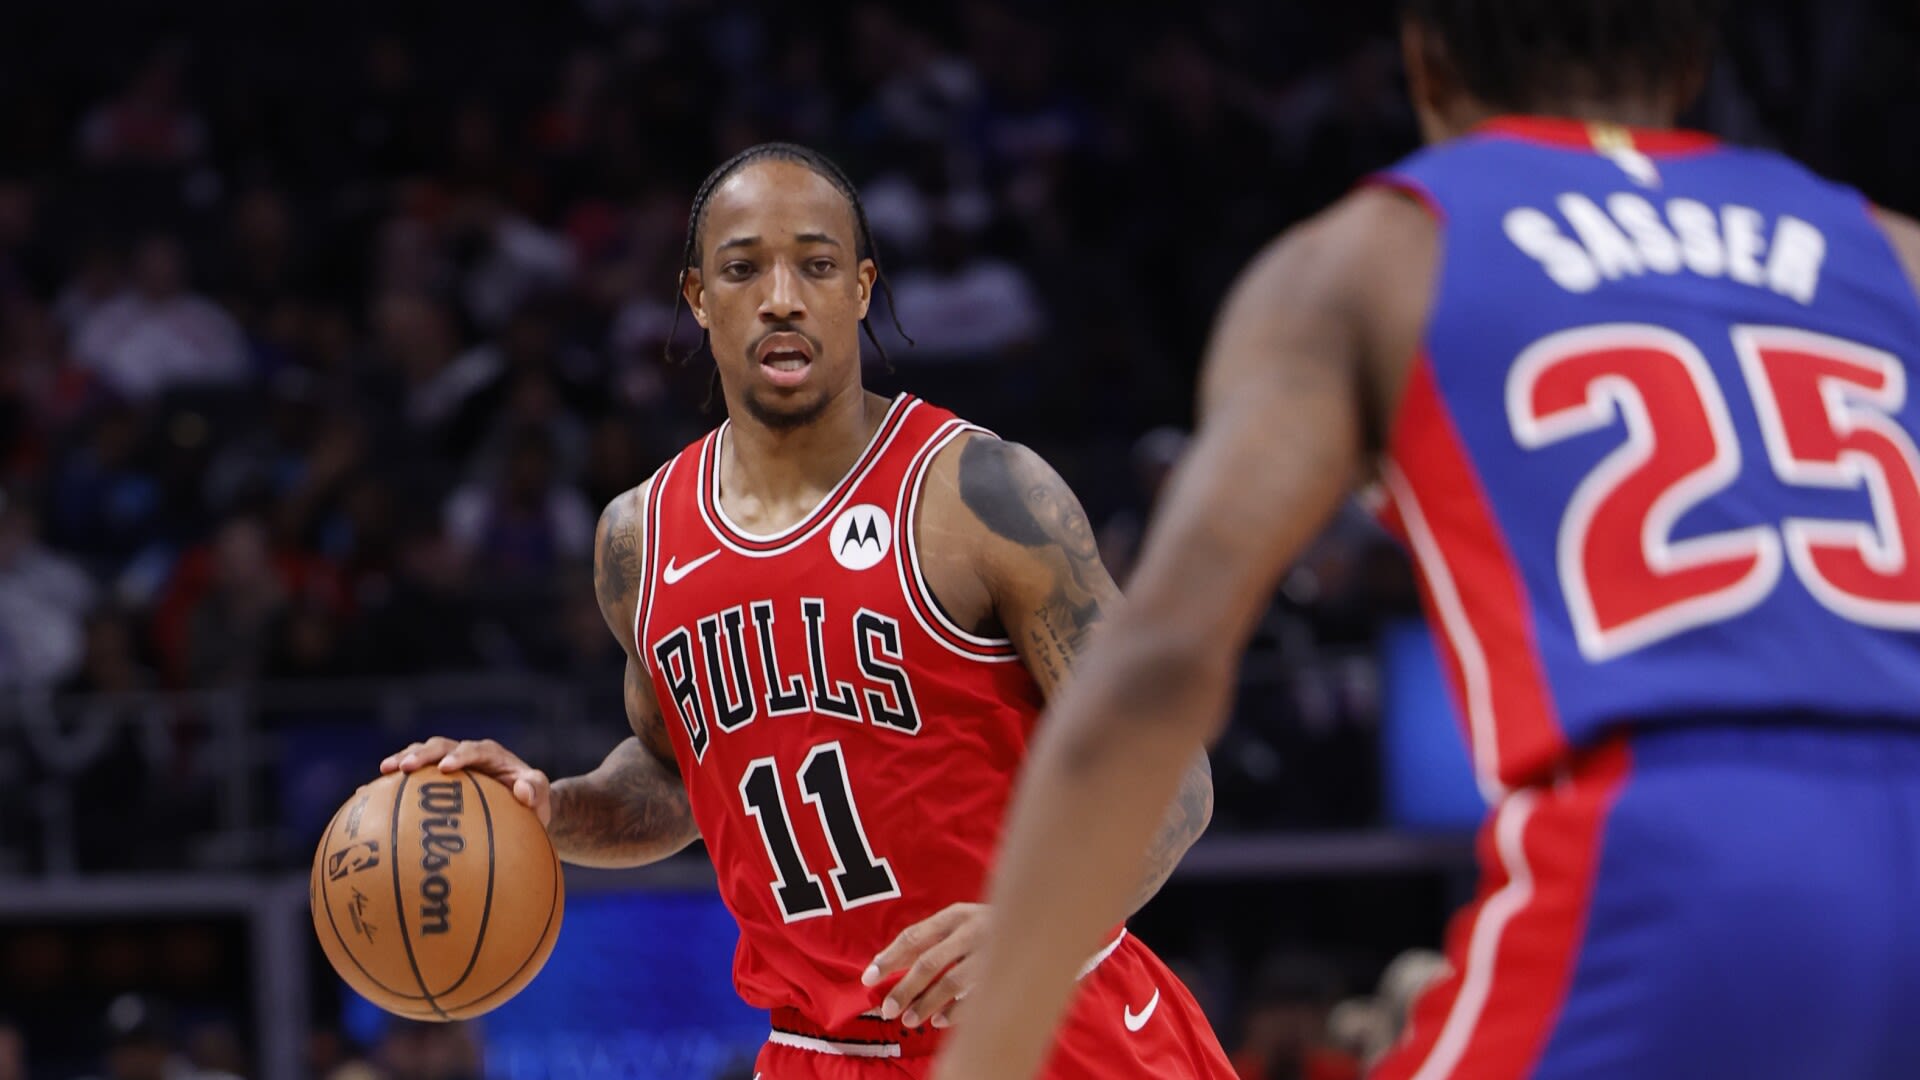 Kings acquire DeMar DeRozan in three-team sign-and-trade with Bulls, Spurs